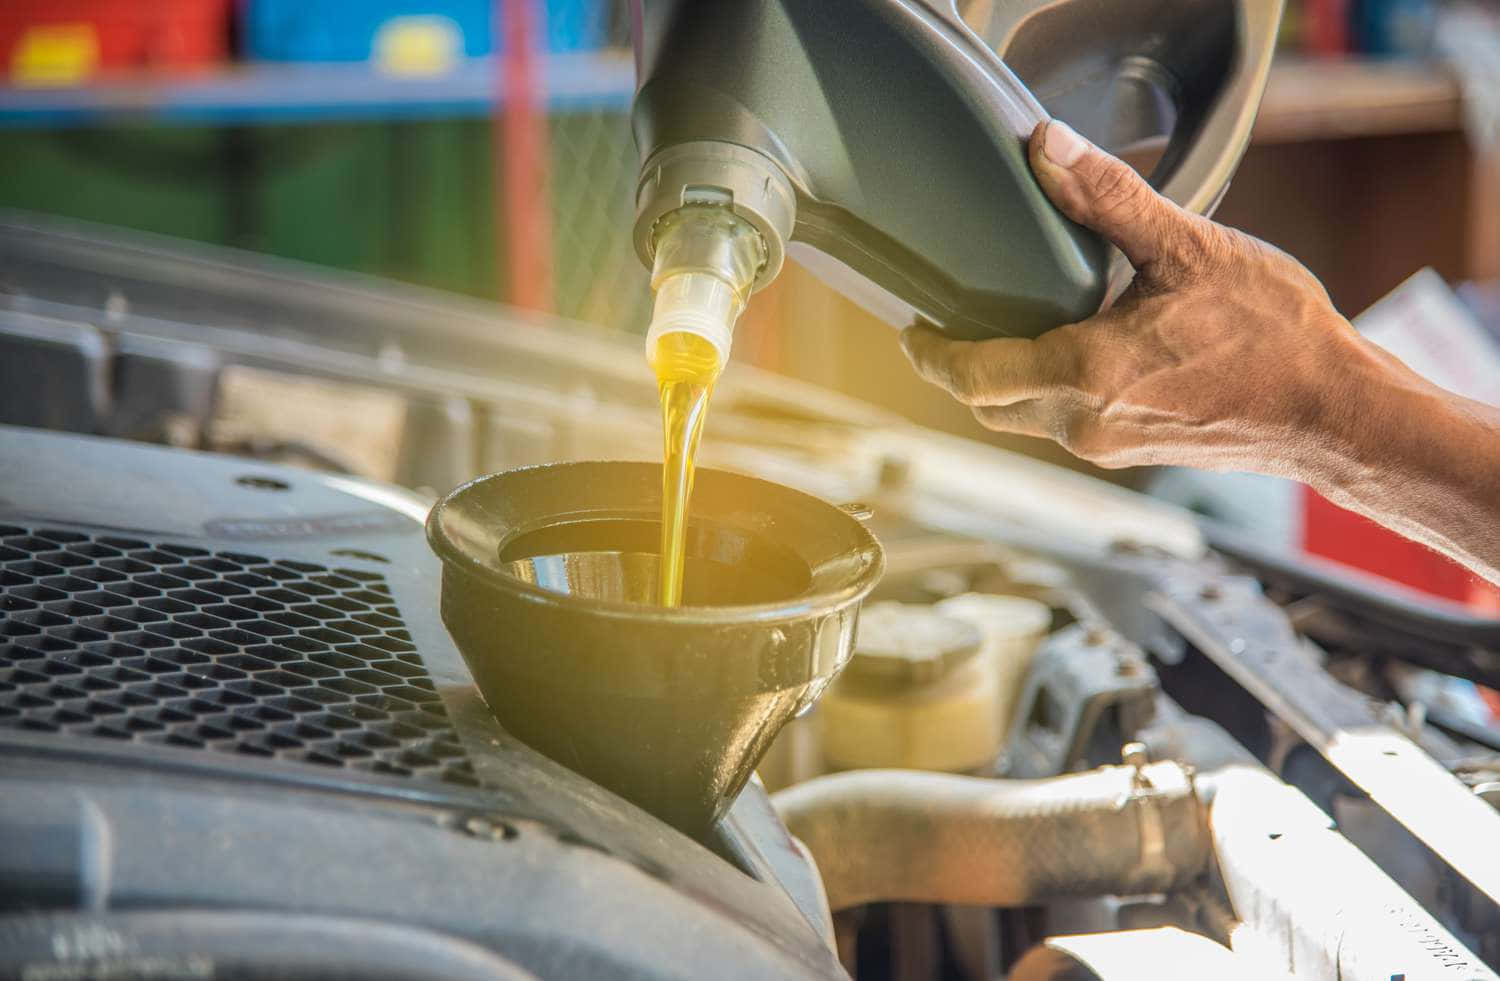 Always check and change your engine oil for the best performance